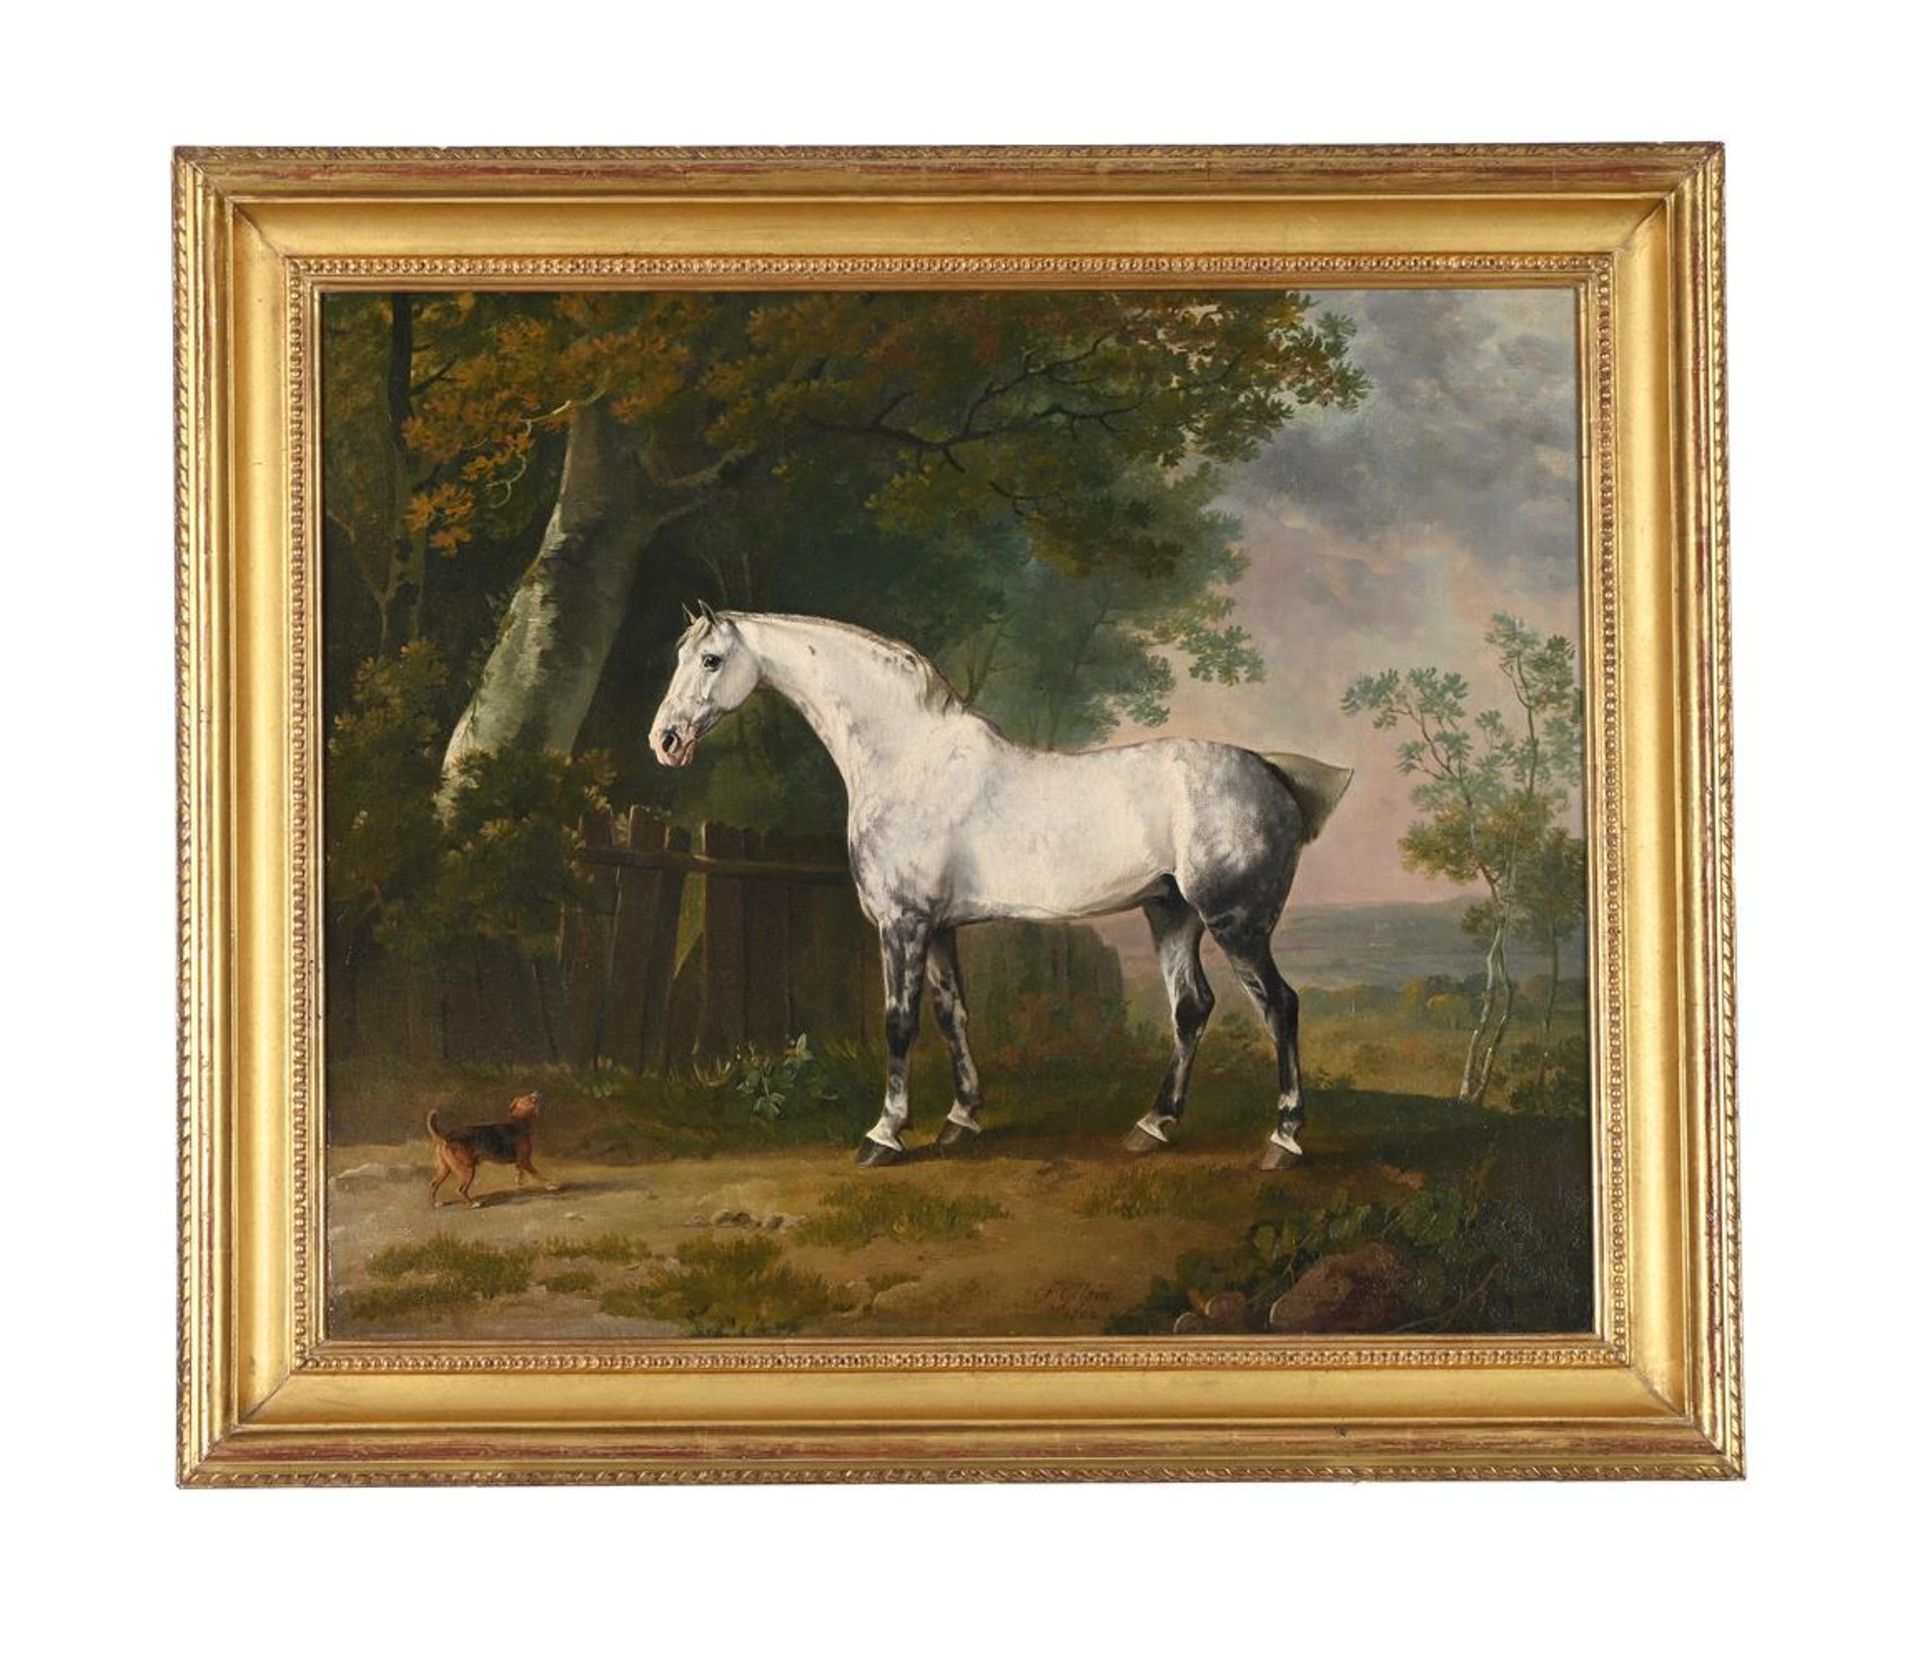 SAWREY GILPIN (BRITISH 1733-1807), A GREY HORSE AND A DOG IN A LANDSCAPE - Image 2 of 3